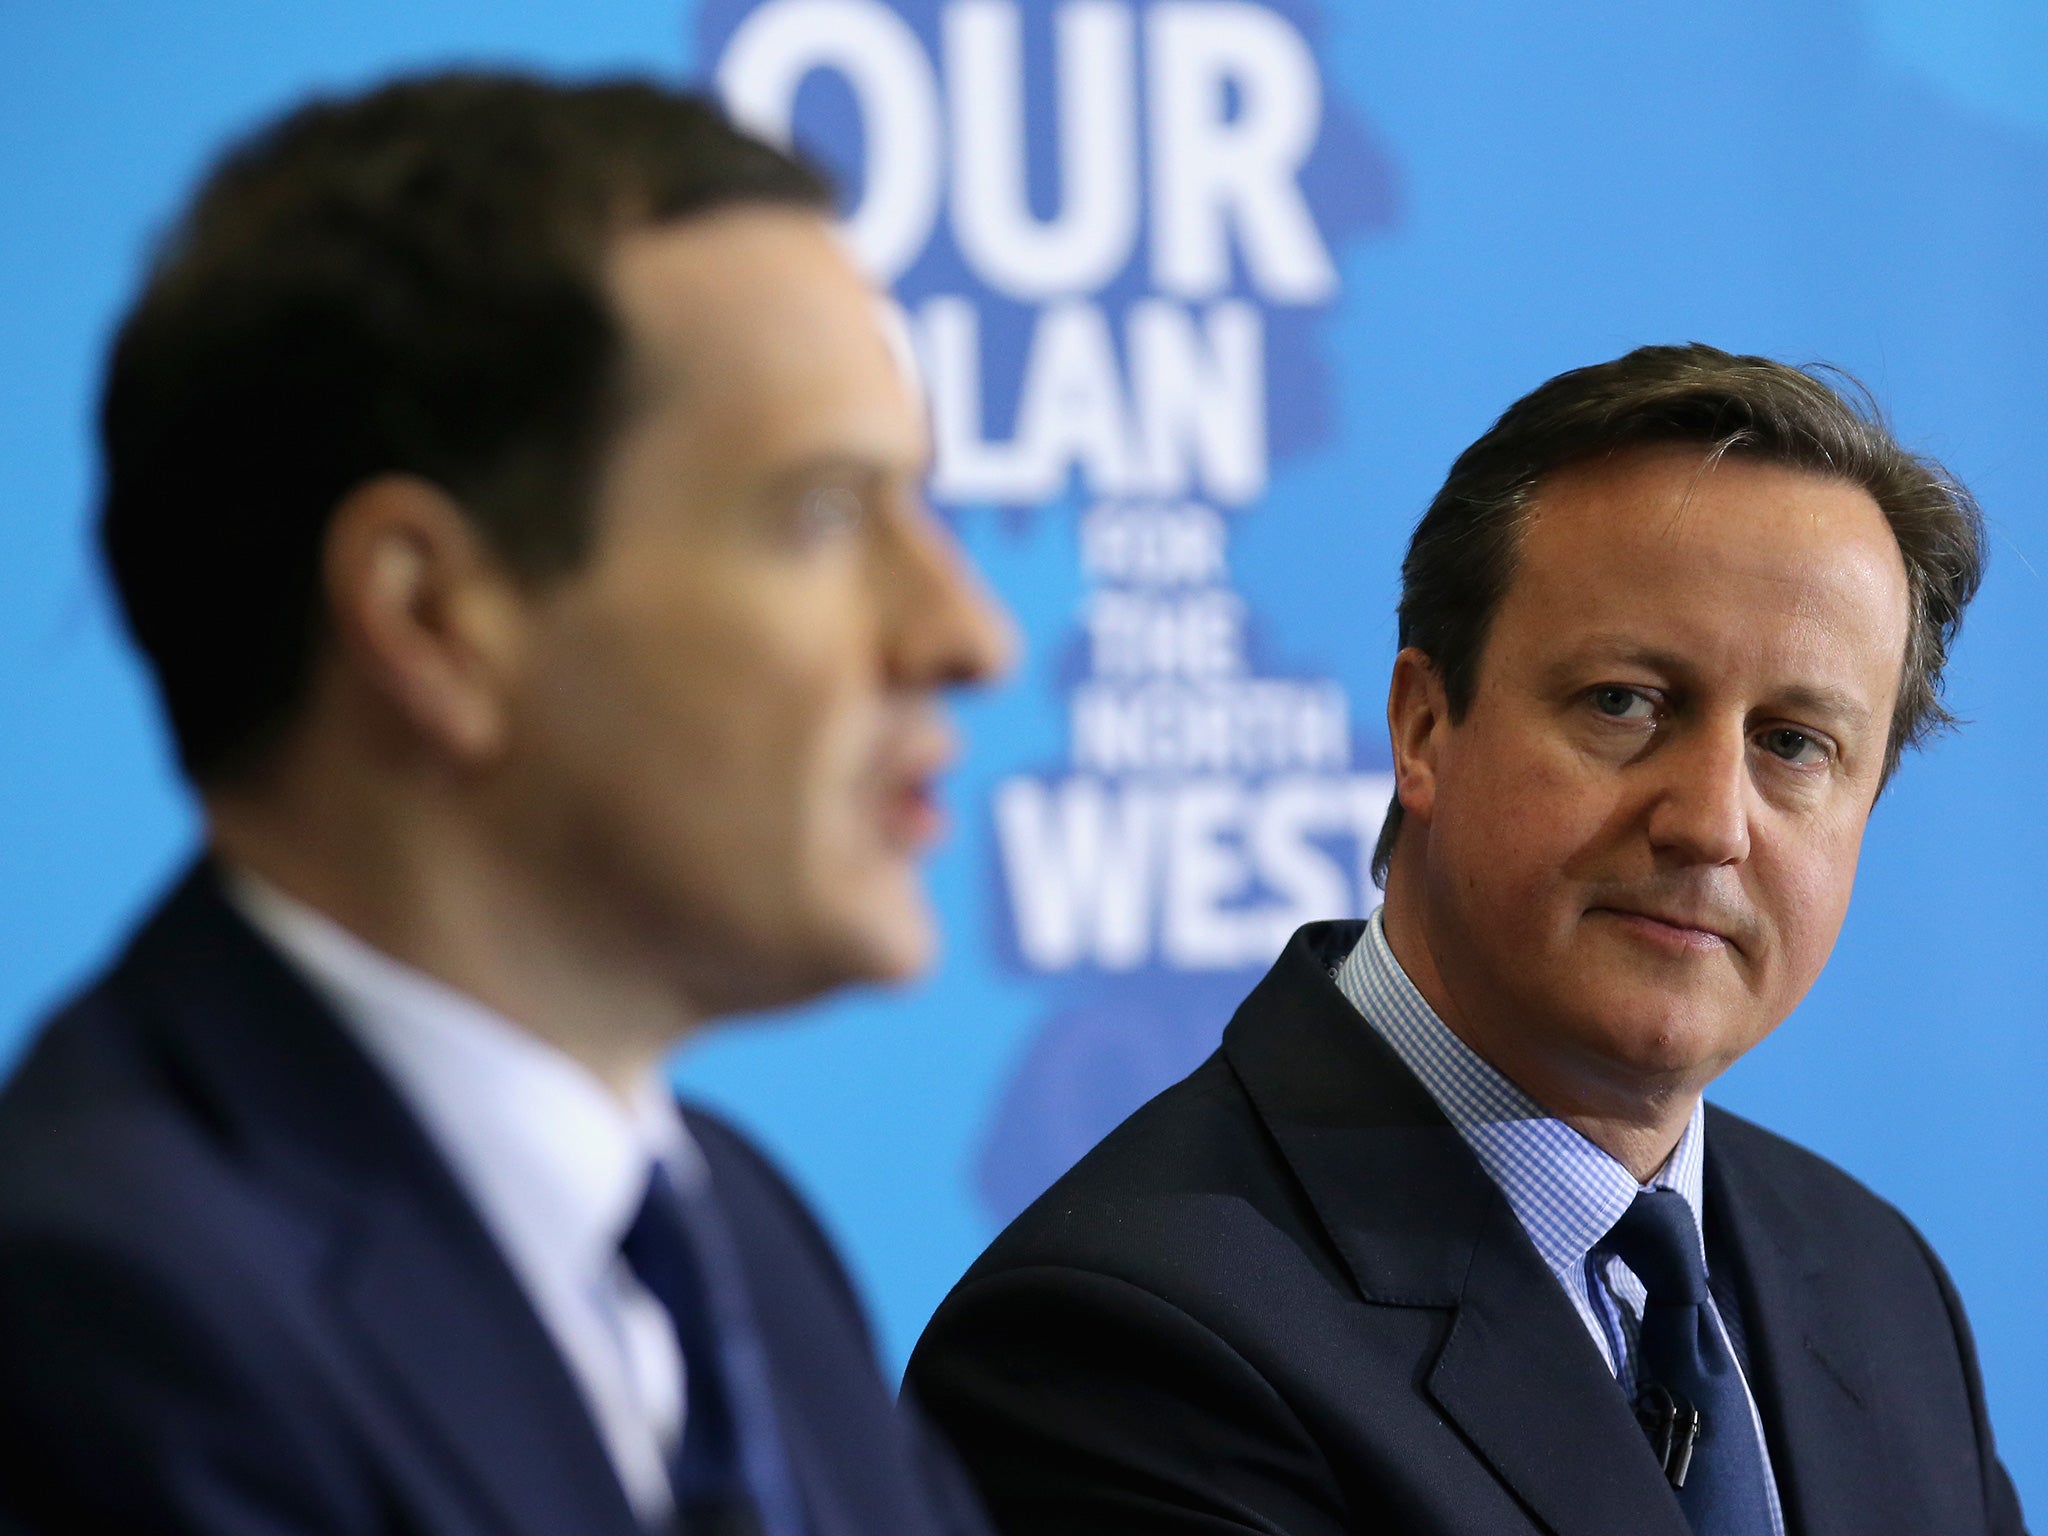 David Cameron and George Osborne have confirmed their intention to go ahead with the £12bn in welfare cuts